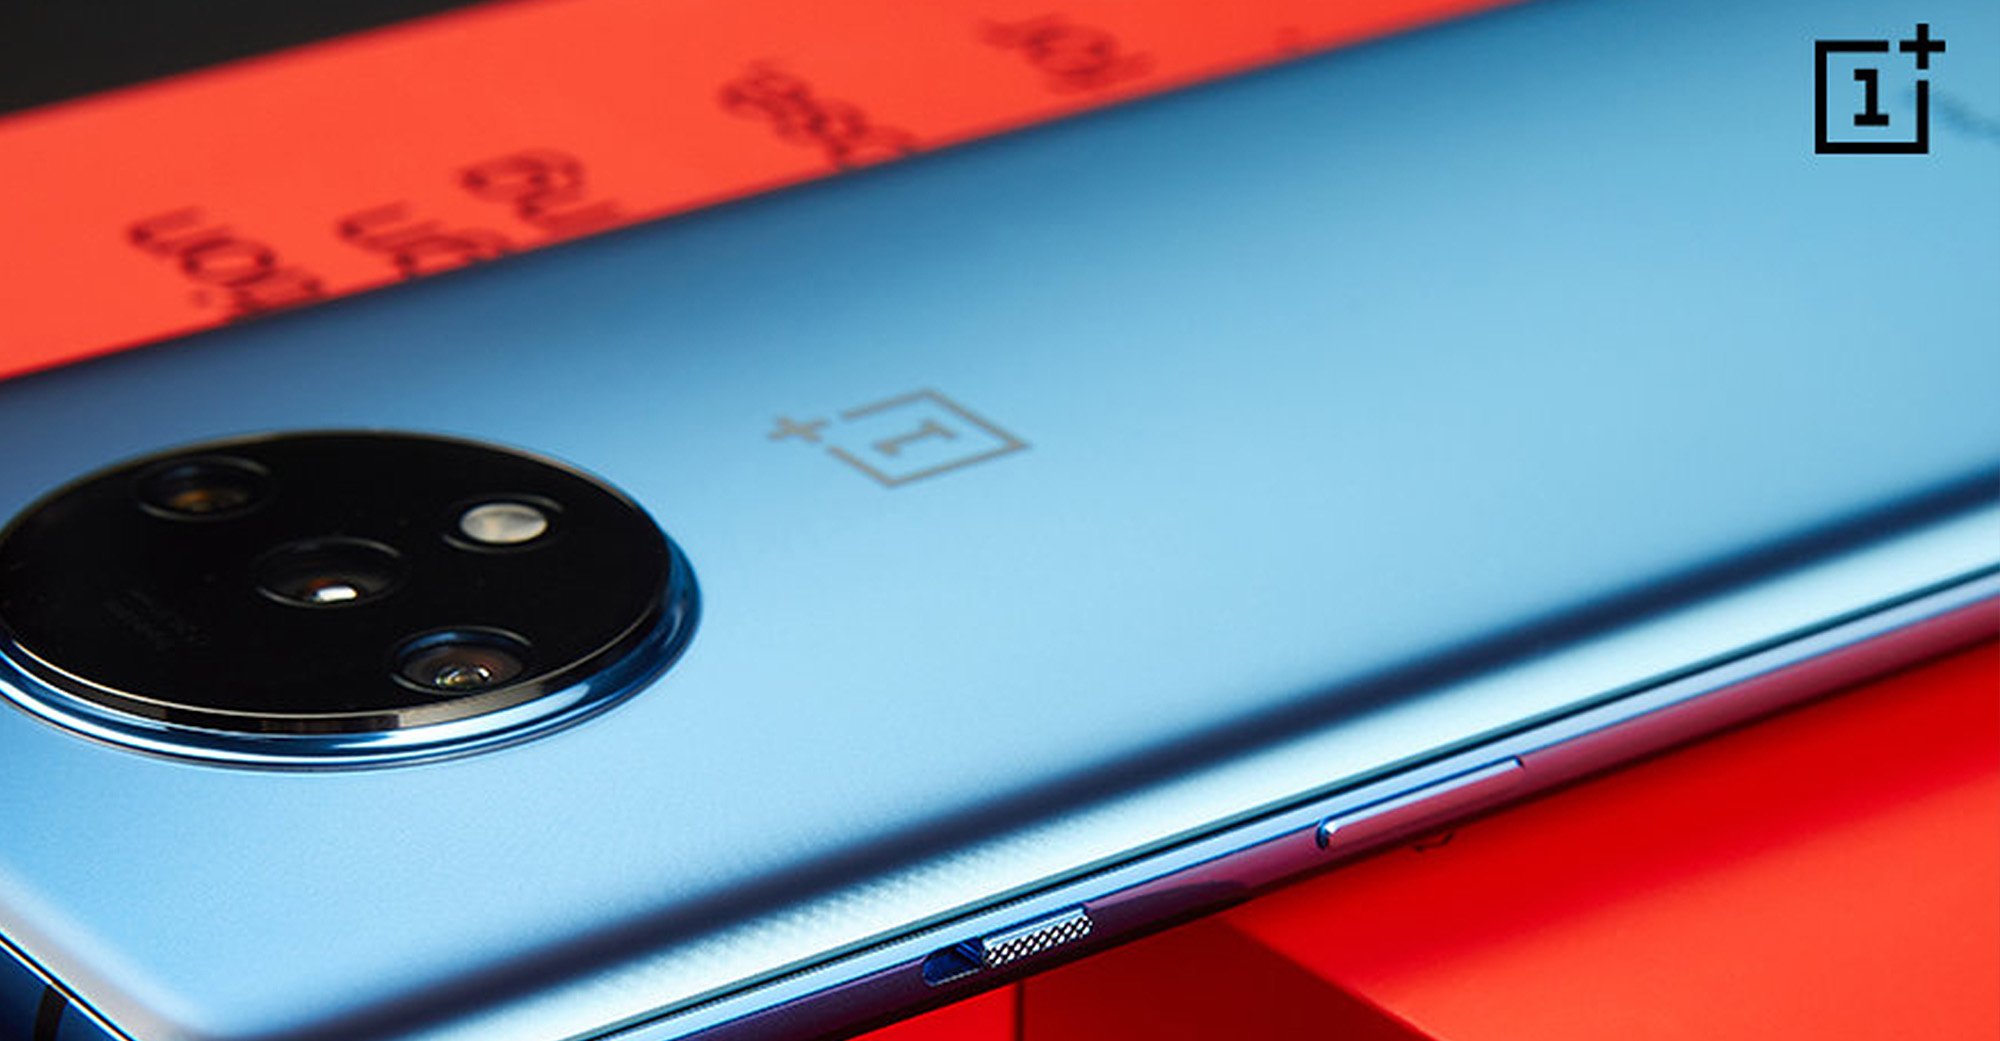 OnePlus Smartphones to Feature 120Hz Refresh Rate